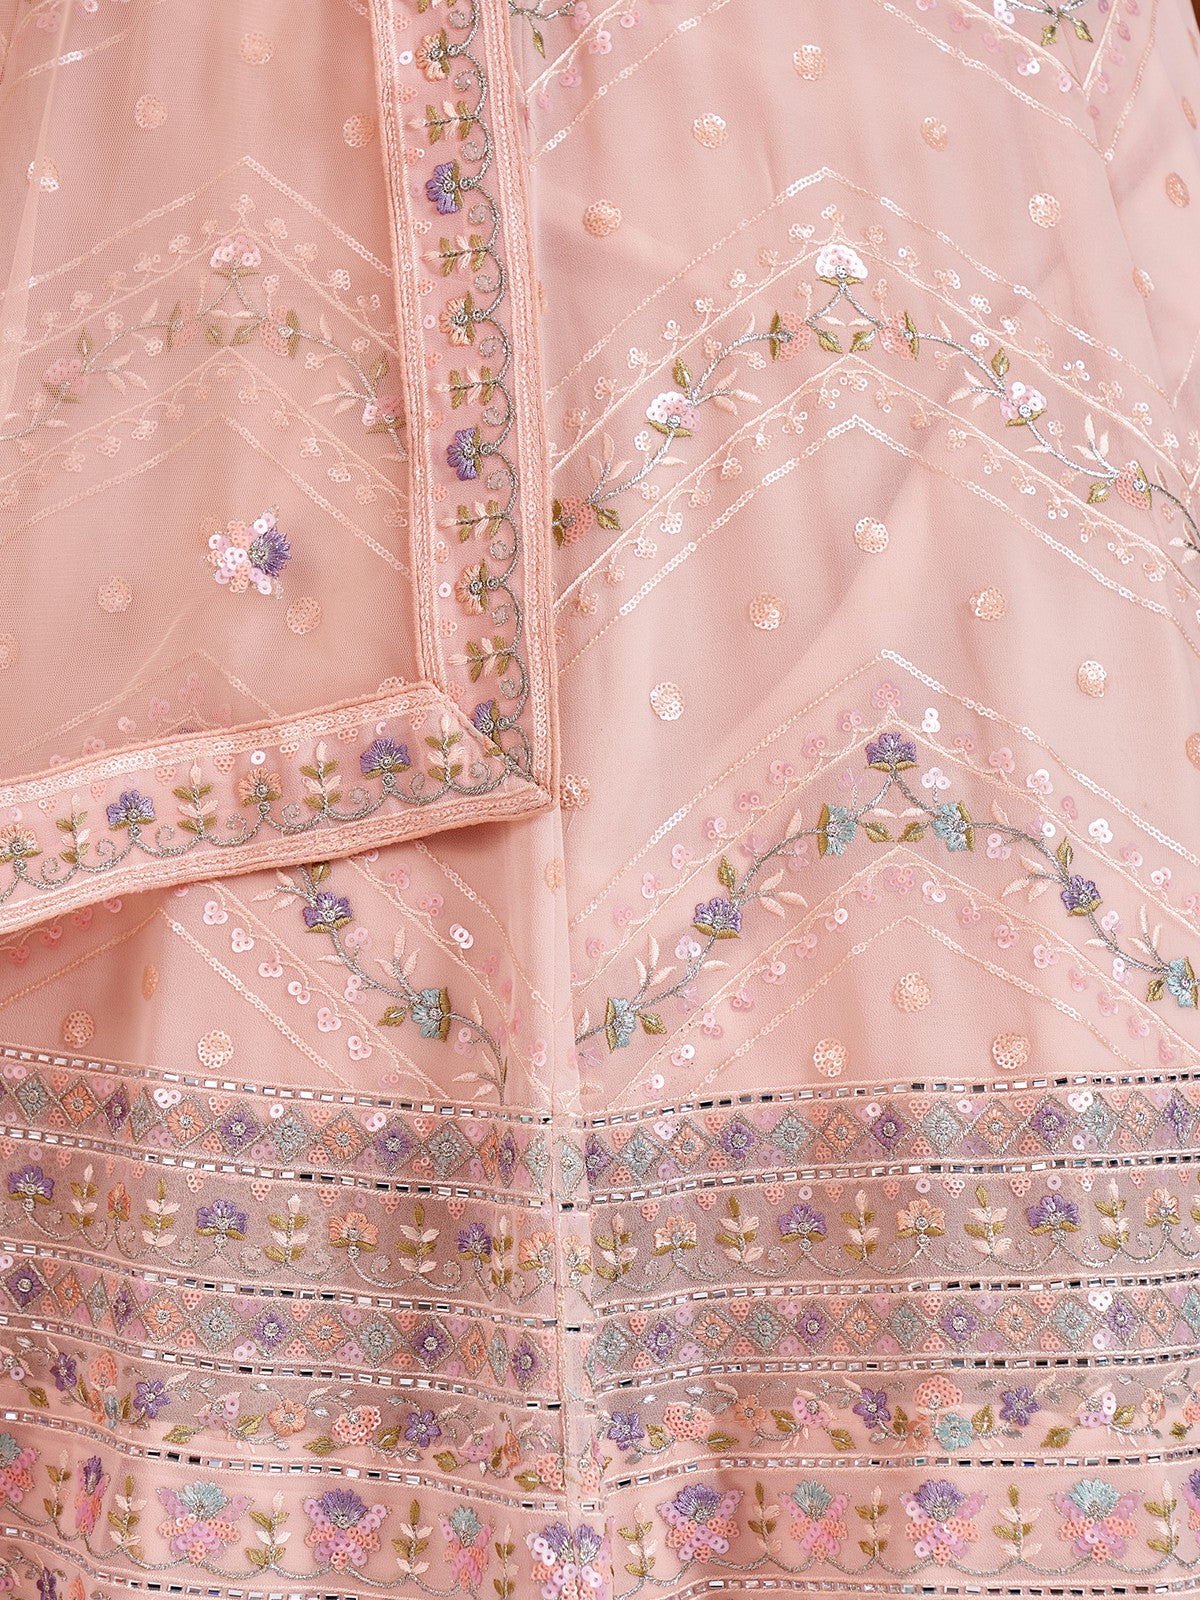 Odette - Stunning Pink Georgette Semi Stitched Lehenga With Unstitched Blouse